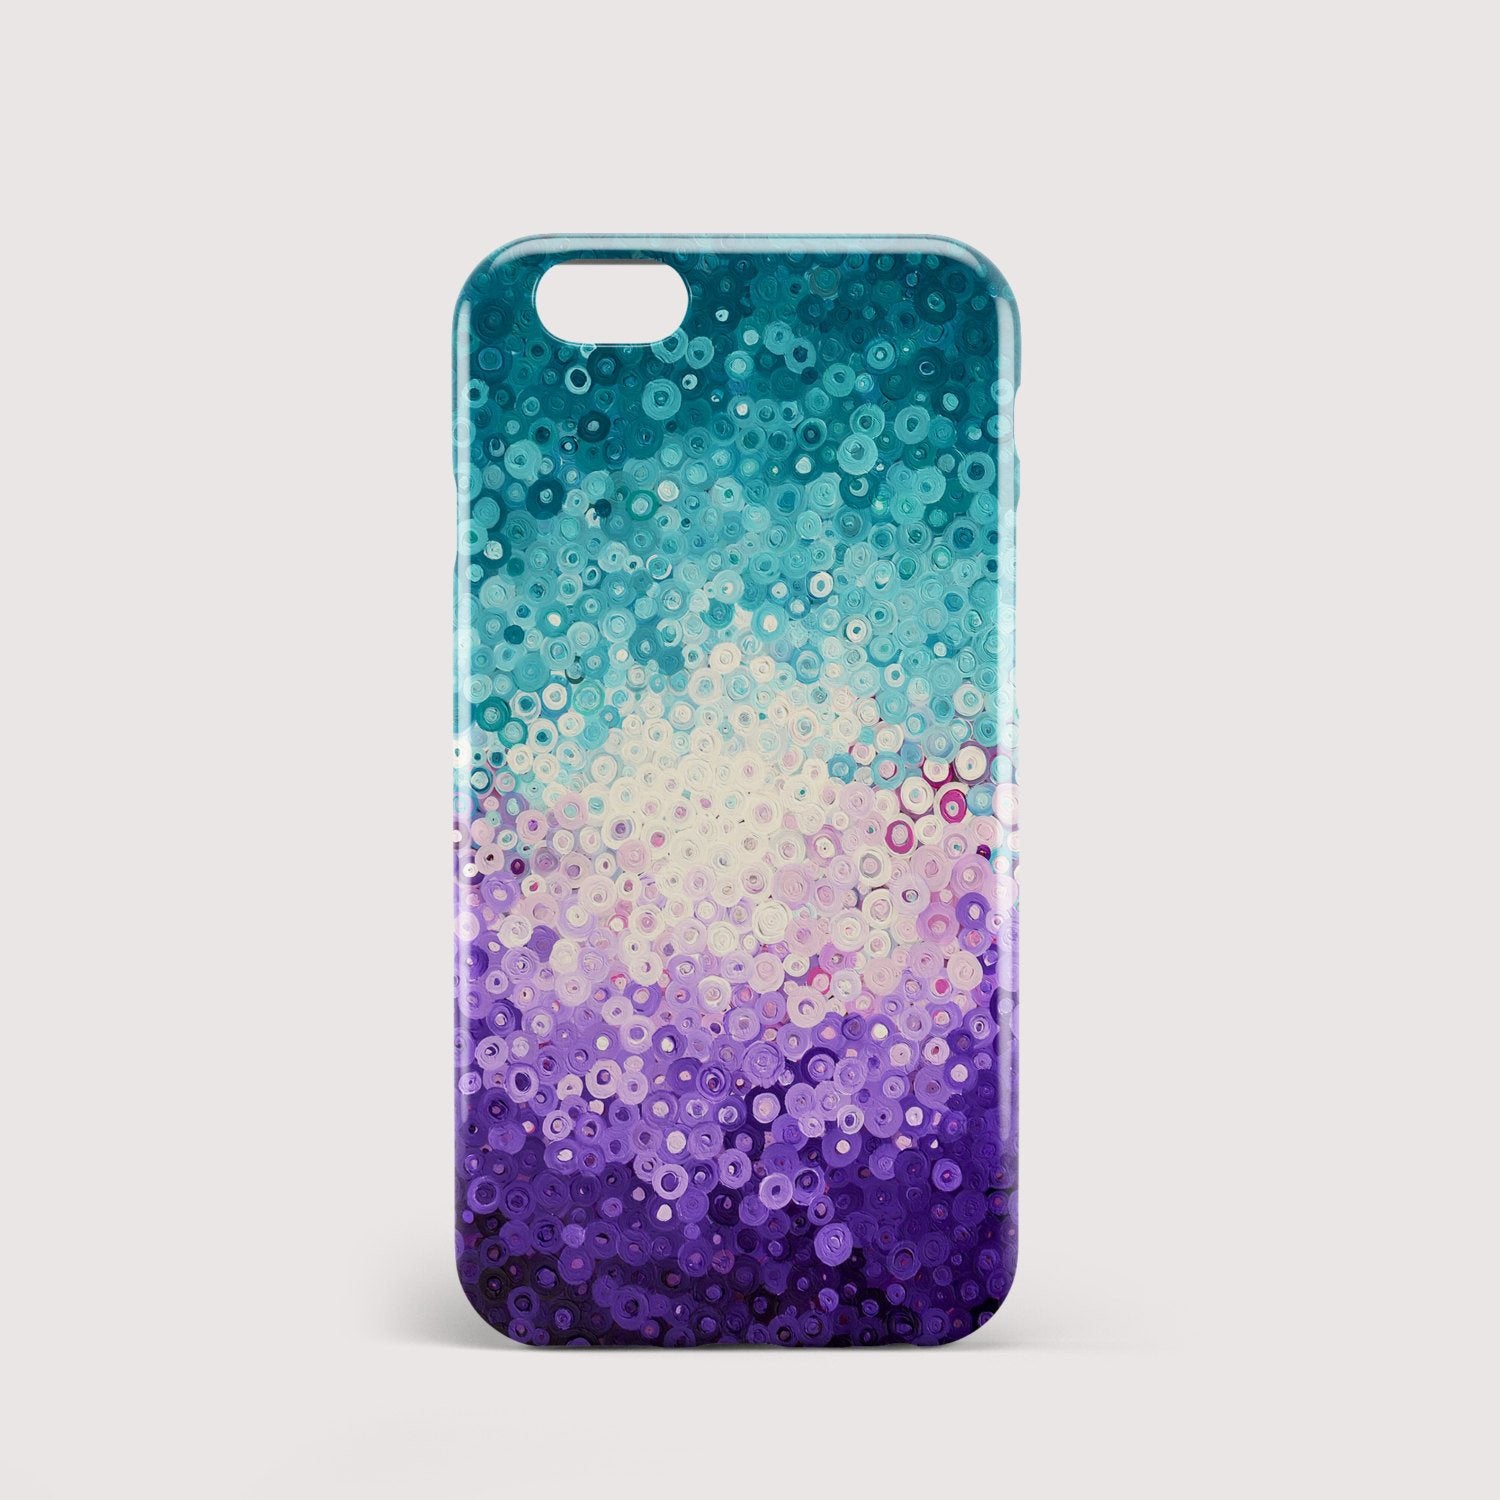 Bluebells iPhone Case - Louise Mead